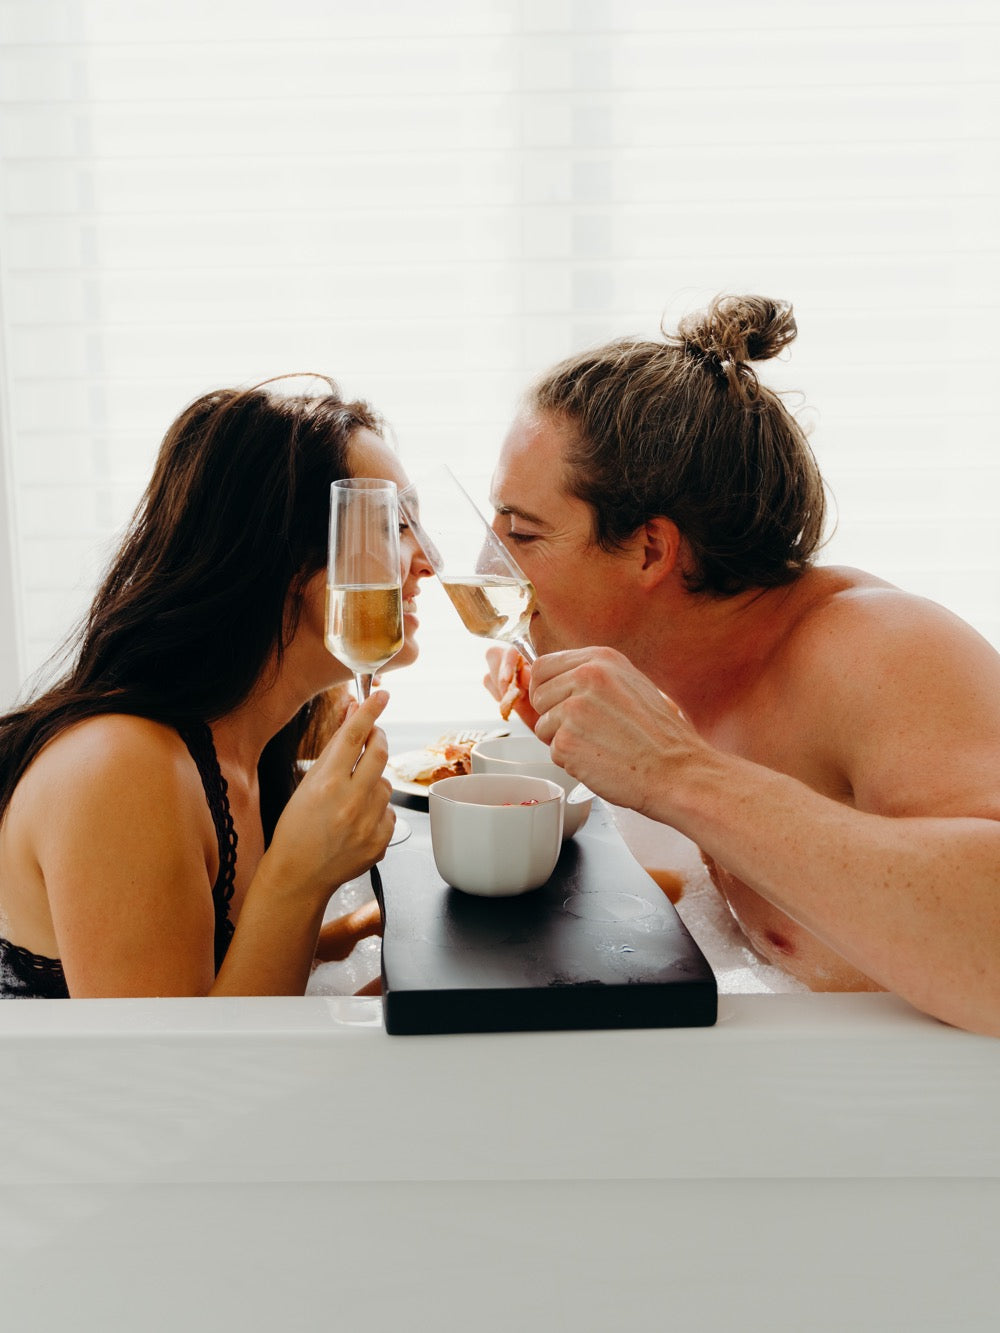 Creative, Romantic, and Fun Stay-at-Home Date Ideas for Couples: Couple share laughs in the bathtub